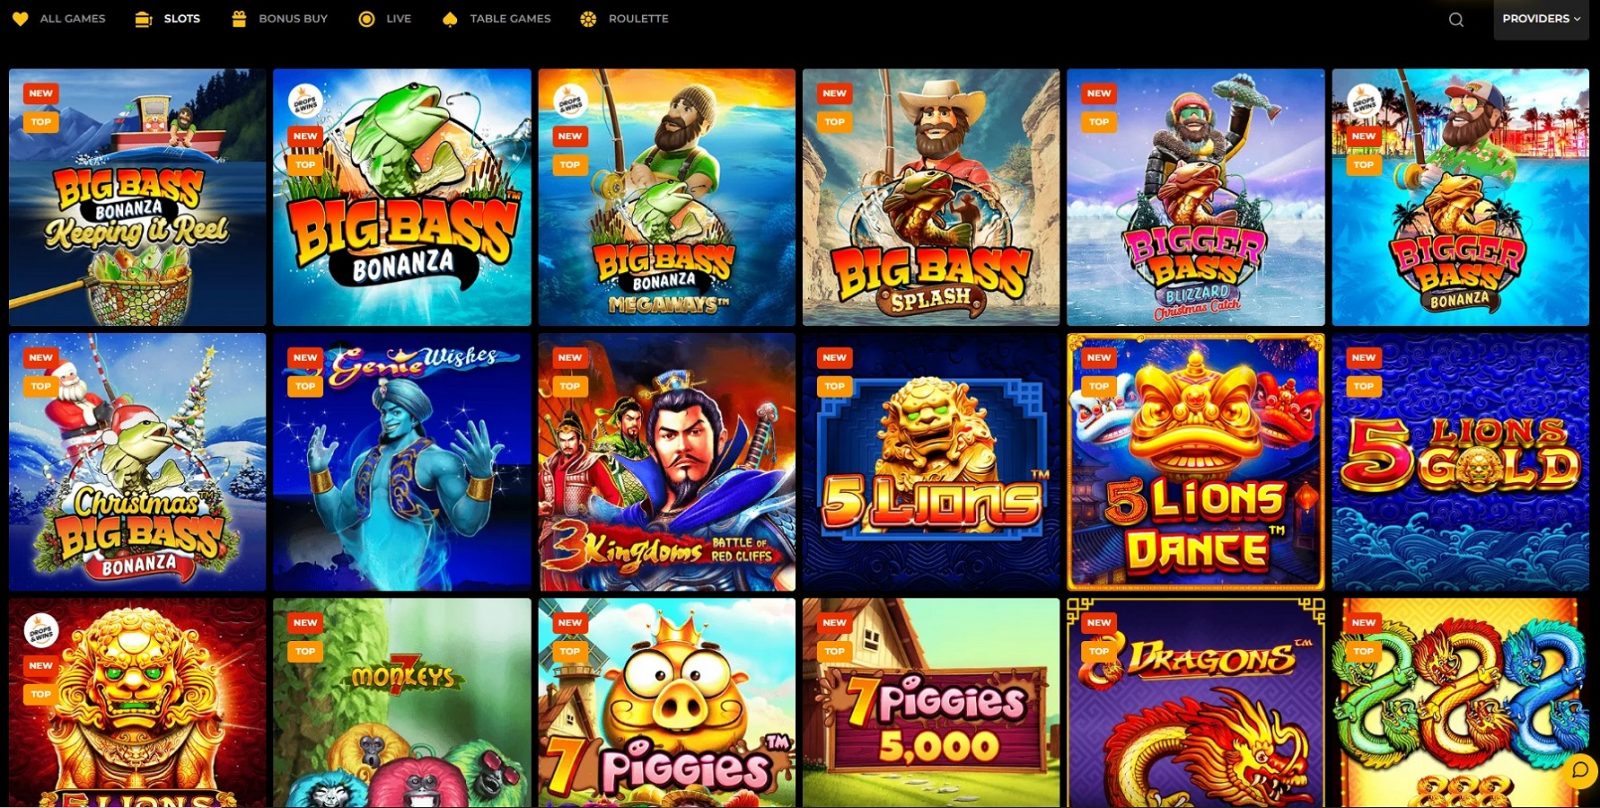 Games and Providers at JoyWinner Casino Online